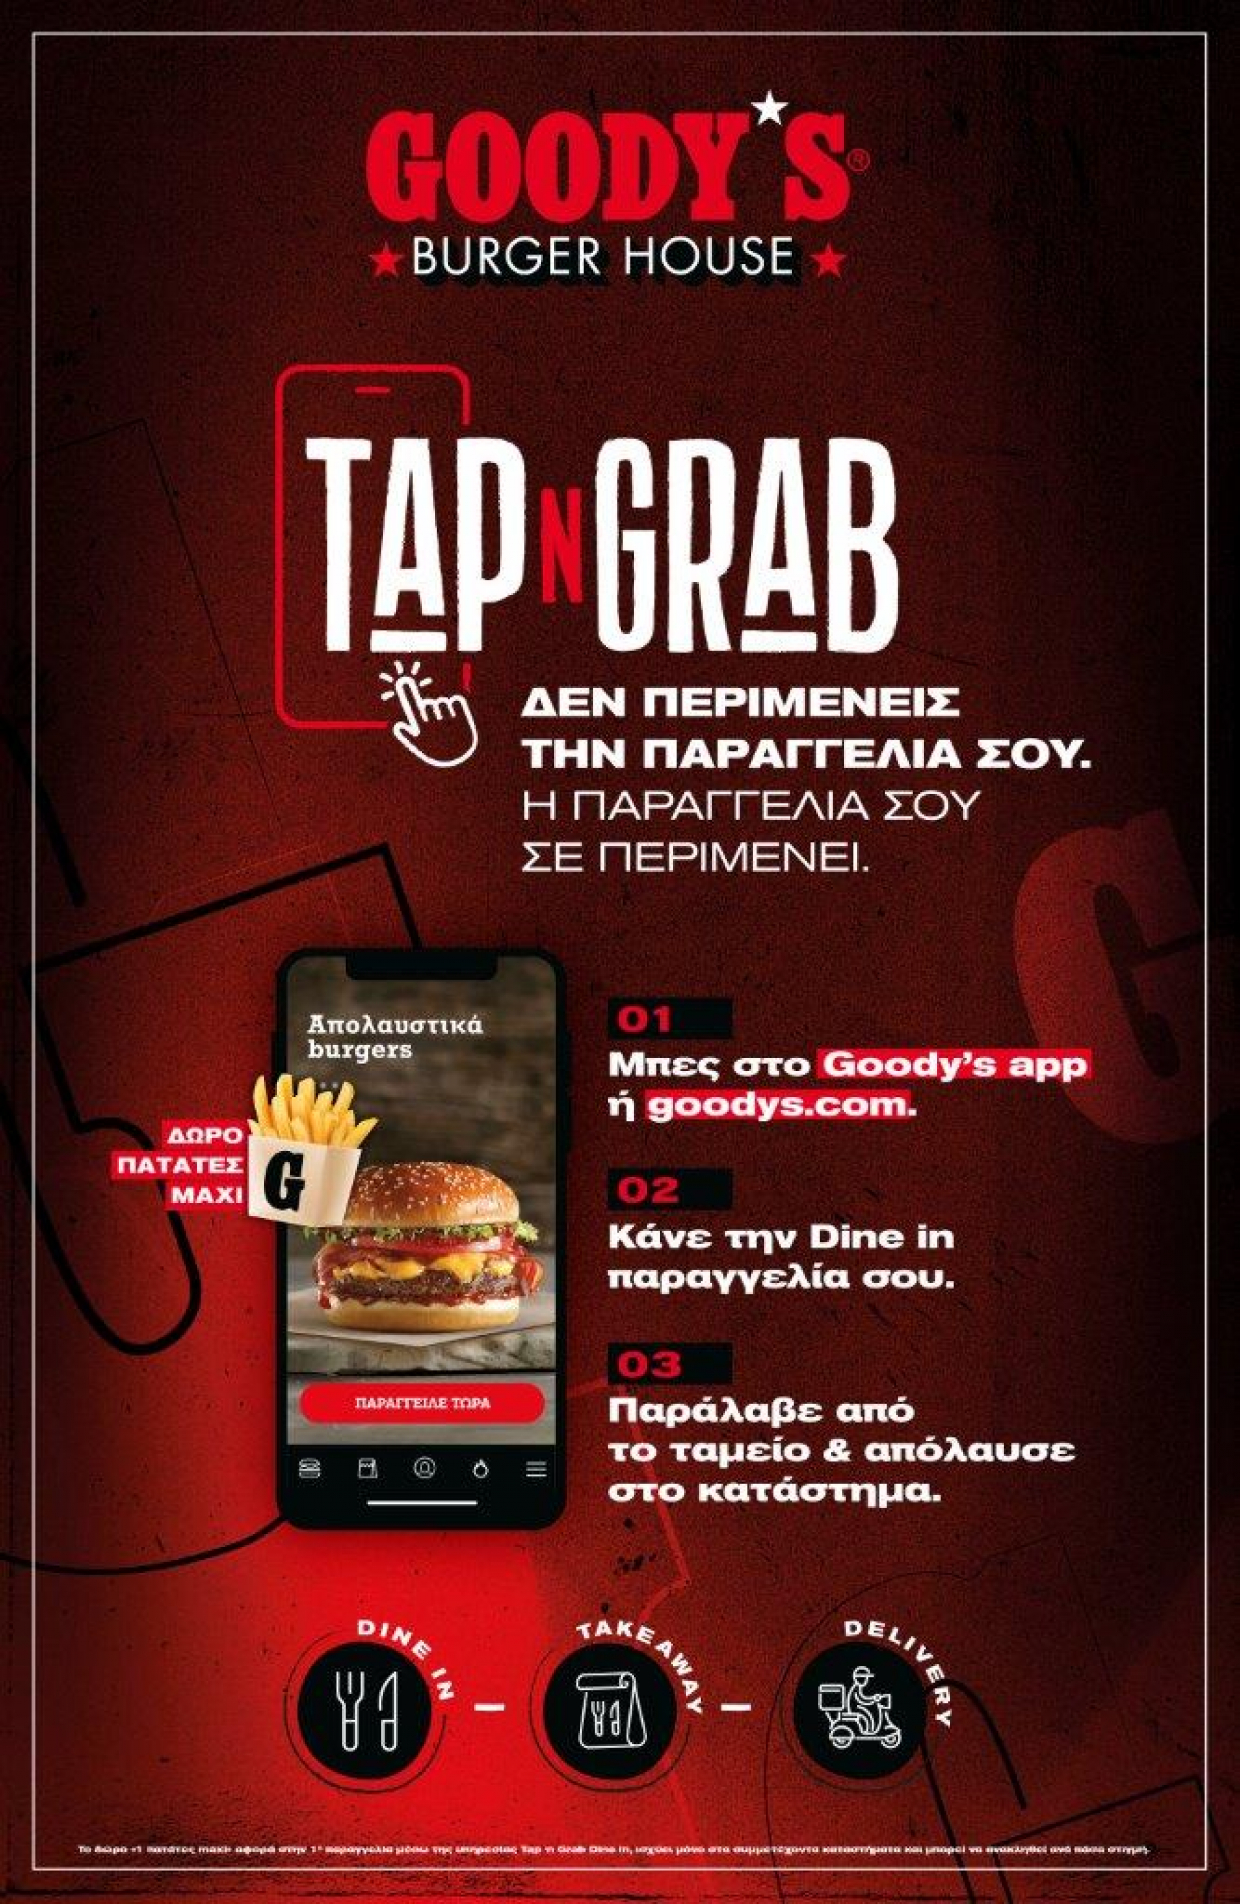 Goody&#039;s Burger House: Νέα υπηρεσία Tap ‘N Grab Dine-in